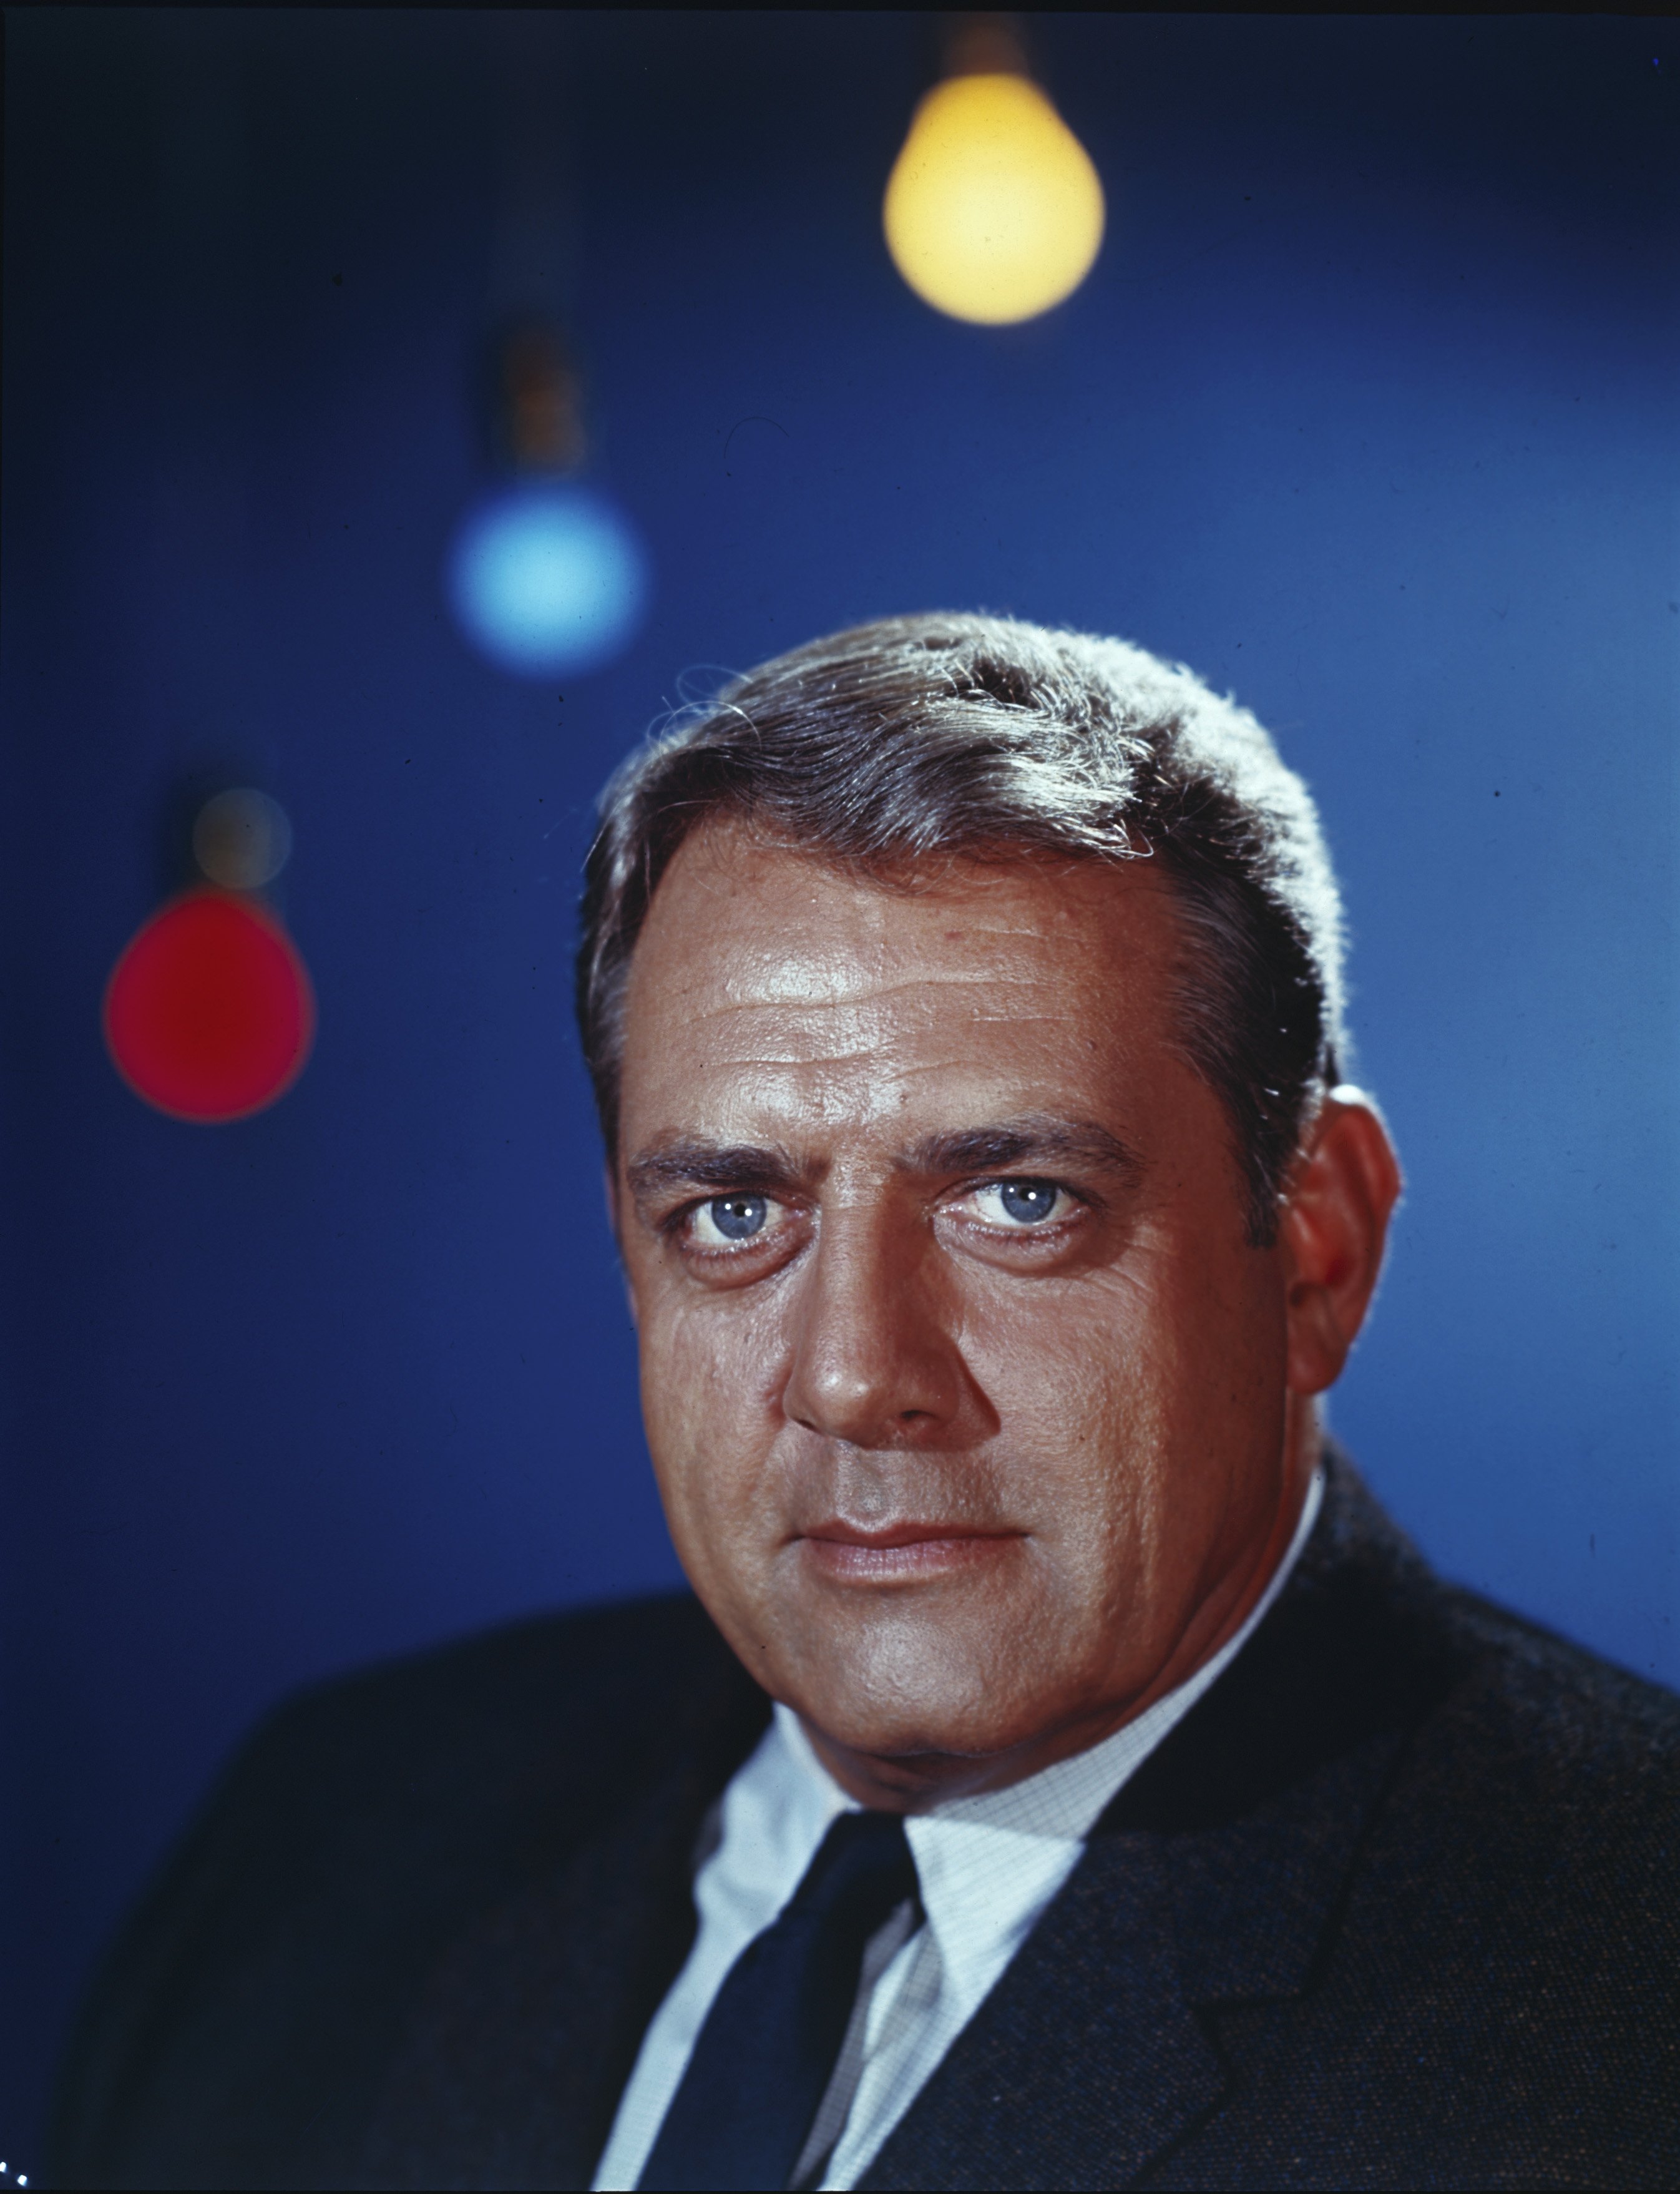 Canadian native Raymond Burr wearing a suit as Robert T. Ironside in the TV series, "Ironside." | Source: Getty Images